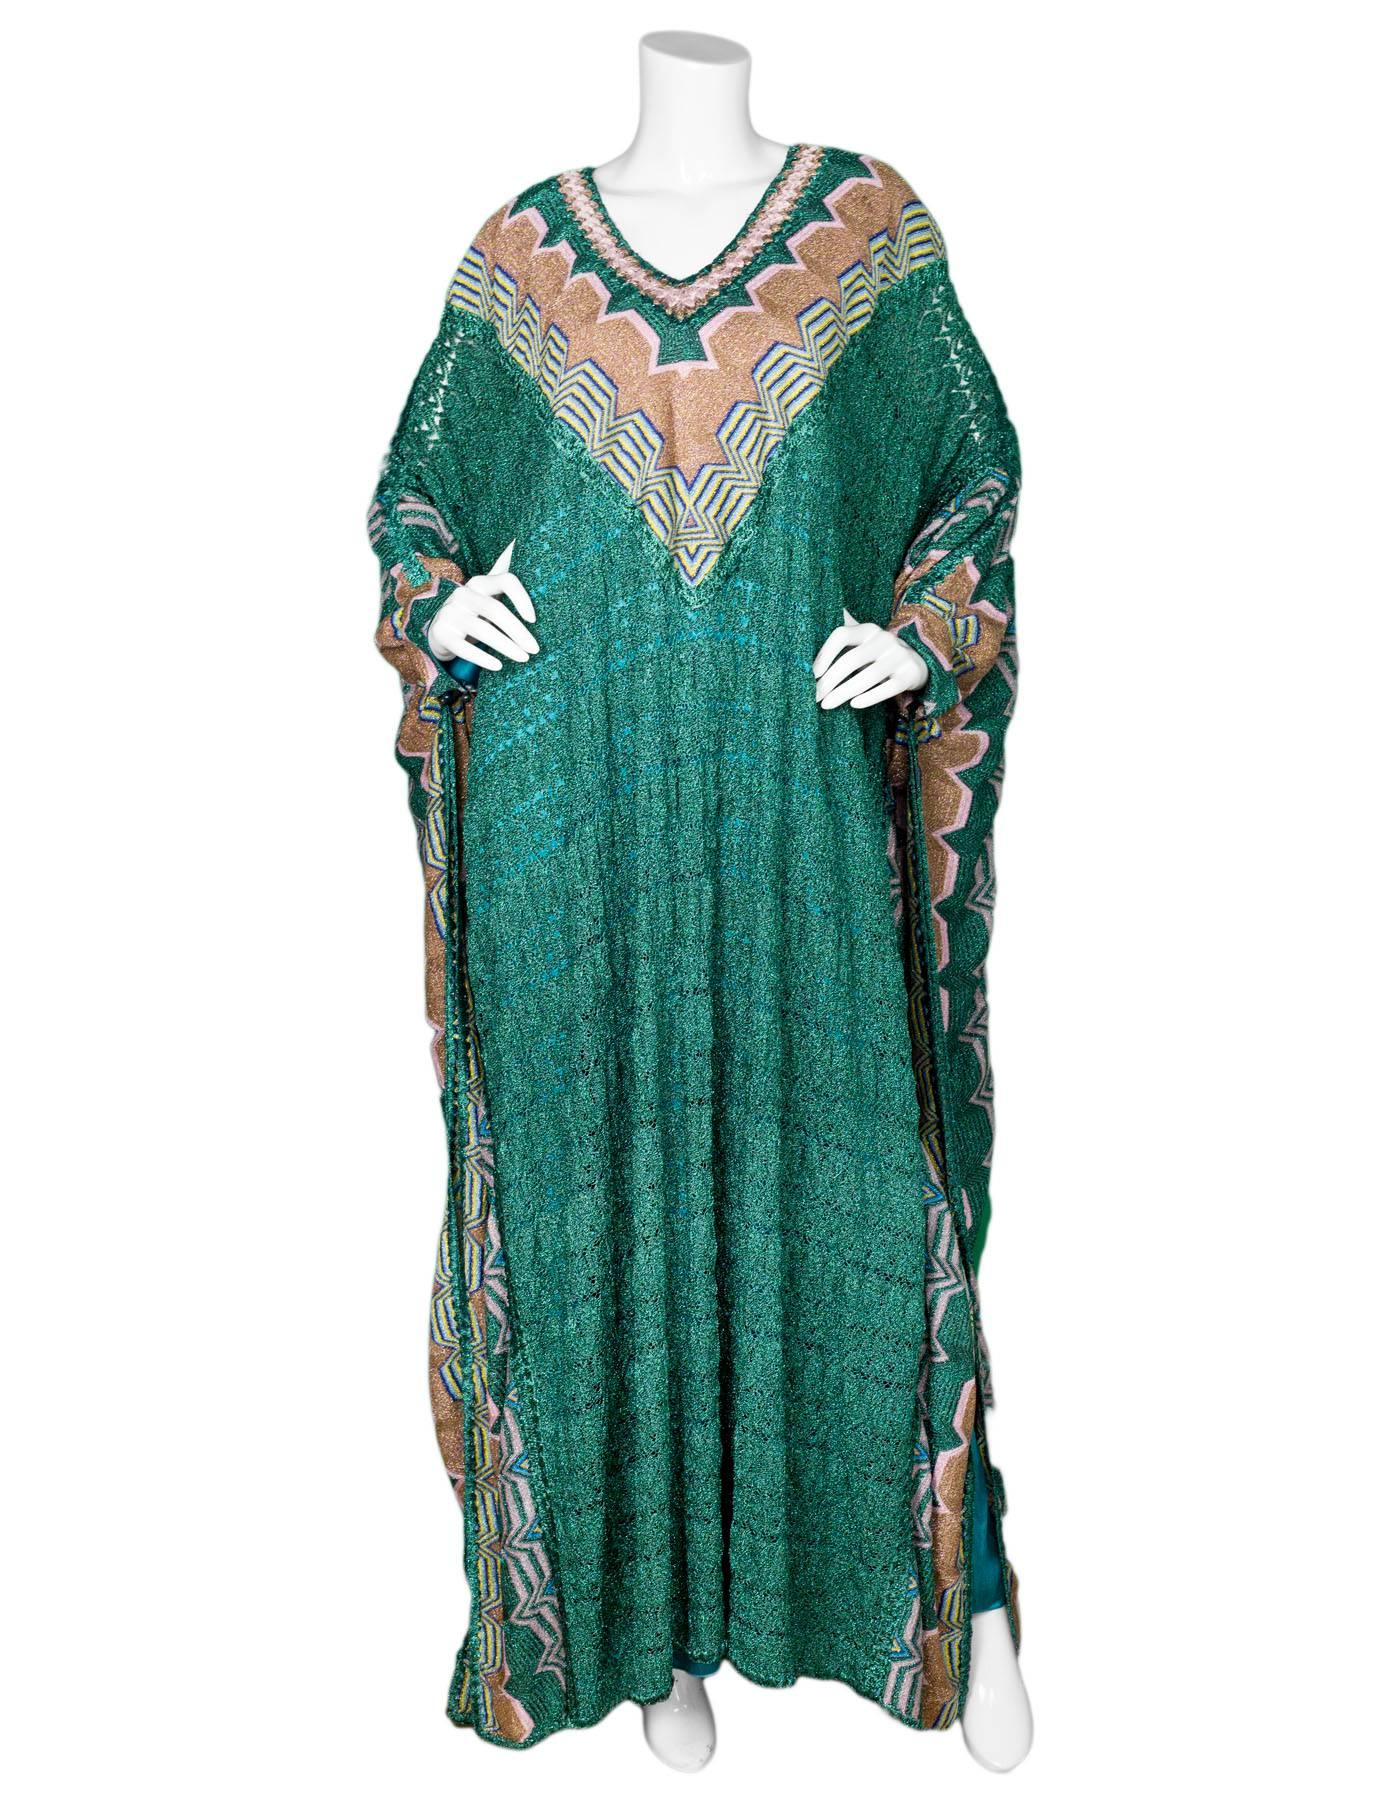 Missoni Green & Pink Metallic Kaftan Sz IT48 NWT

Made In: Italy
Color: Green, pink
Composition: 45% viscose, 35% rayon, 20% polyester
Lining: Green slip
Closure/Opening: Pull over
Retail Price: $2,190 + tax
Overall Condition: Excellent pre-owned